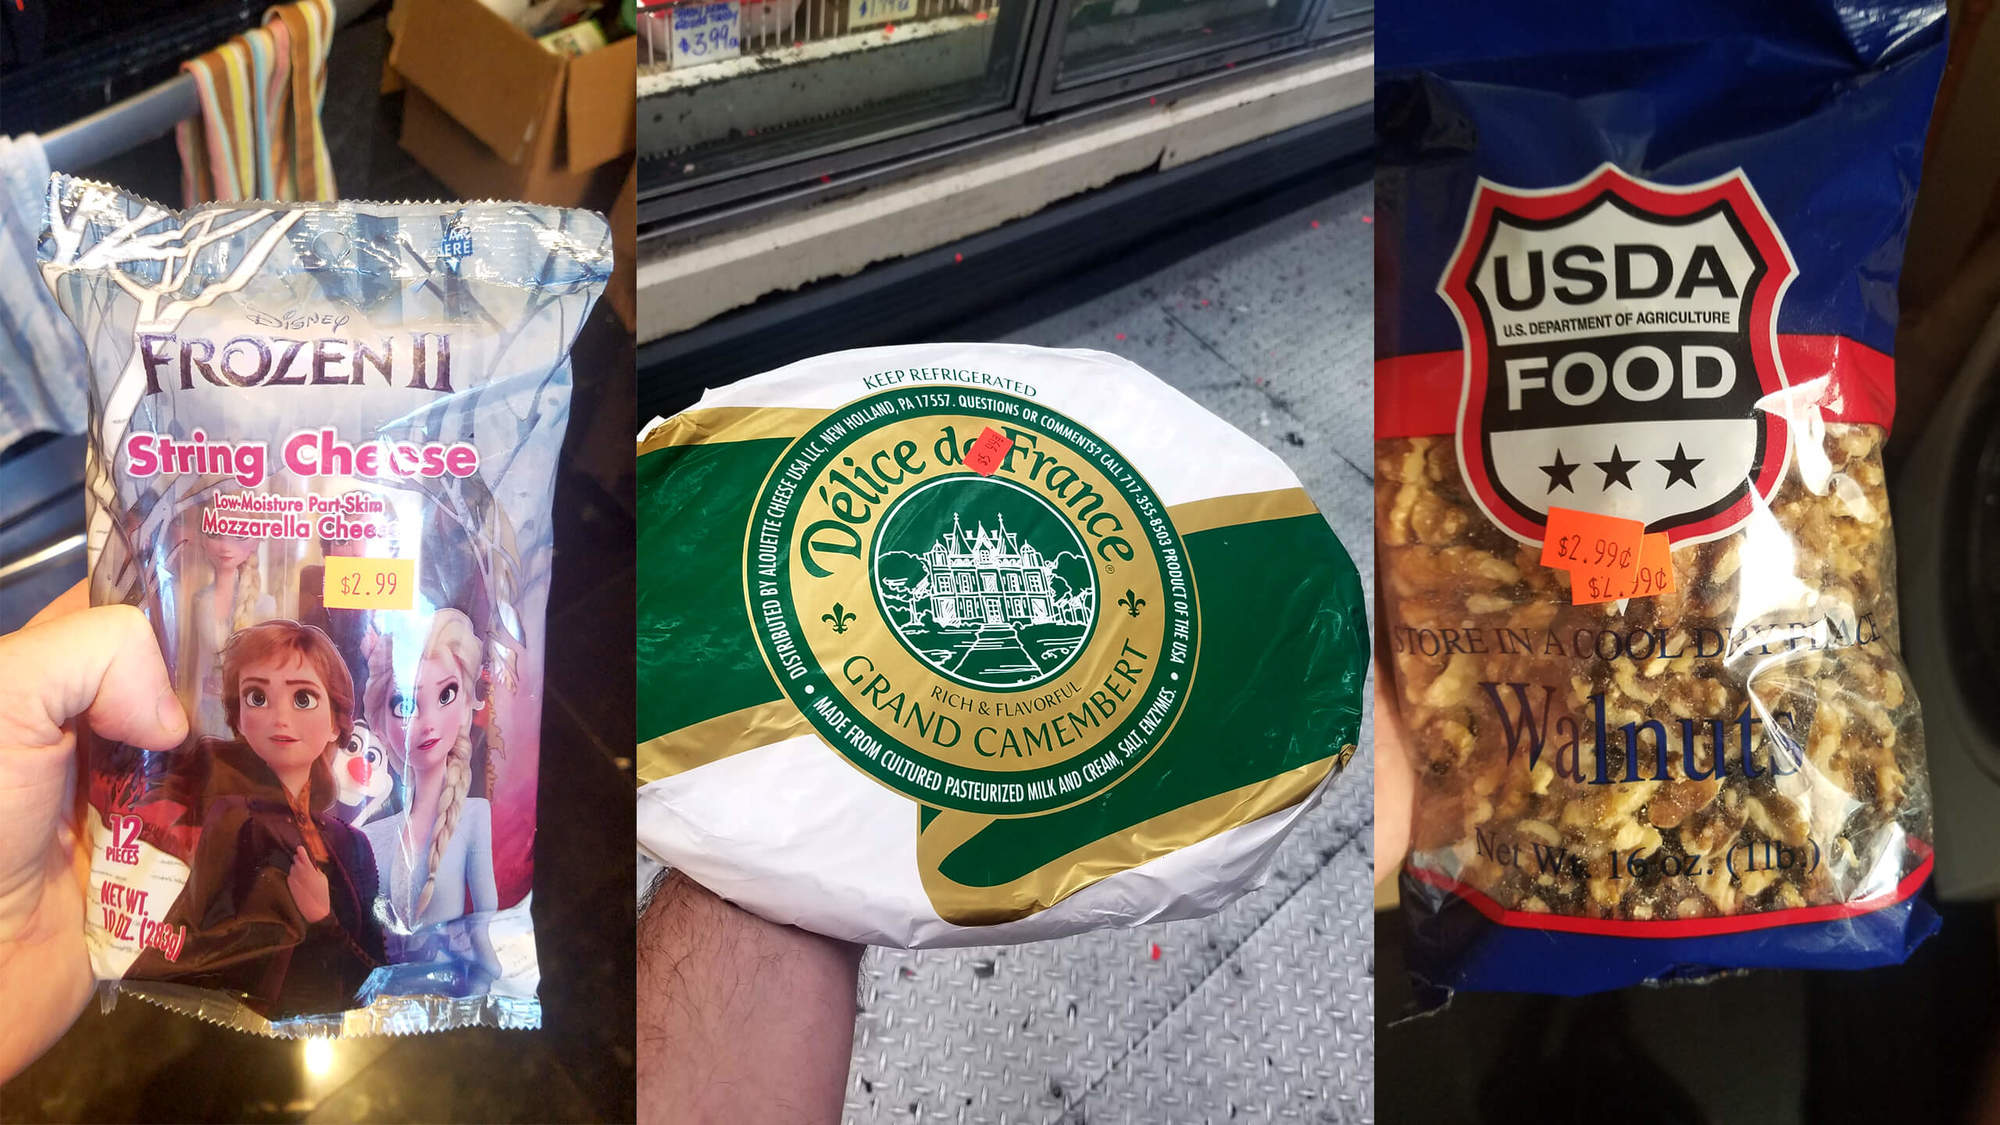 Compilation of three images showing Frozen themed string cheese, camembert, and USDA popcorn. November 2020